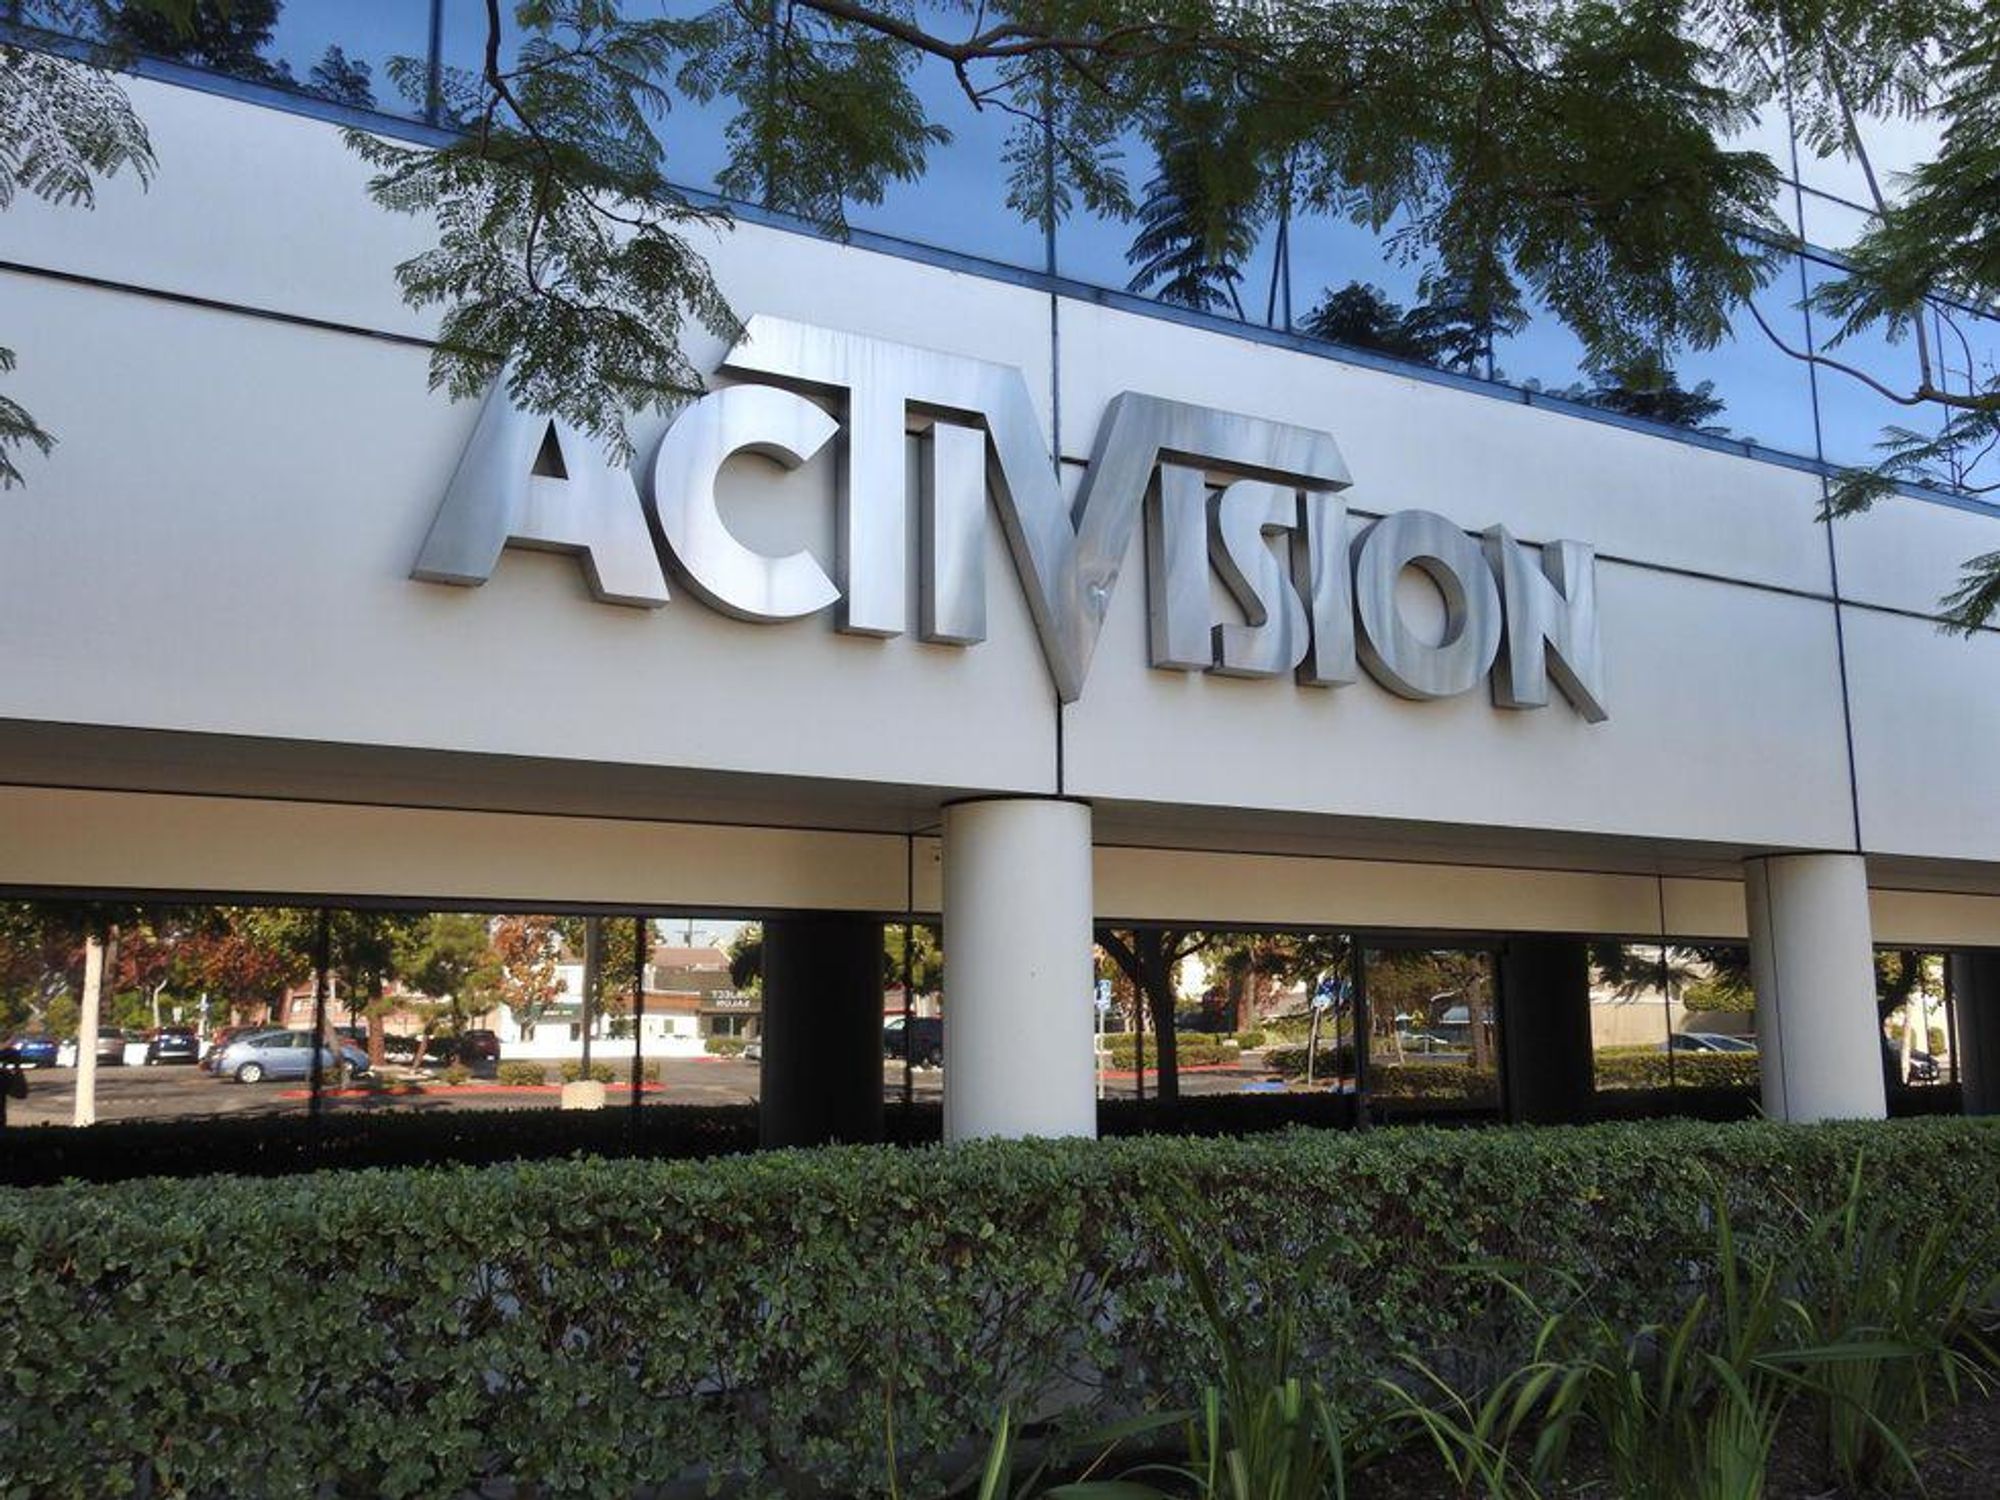 Analysis: Microsoft’s Acquisition of Activision Blizzard is a Mixed Bag For Gamers